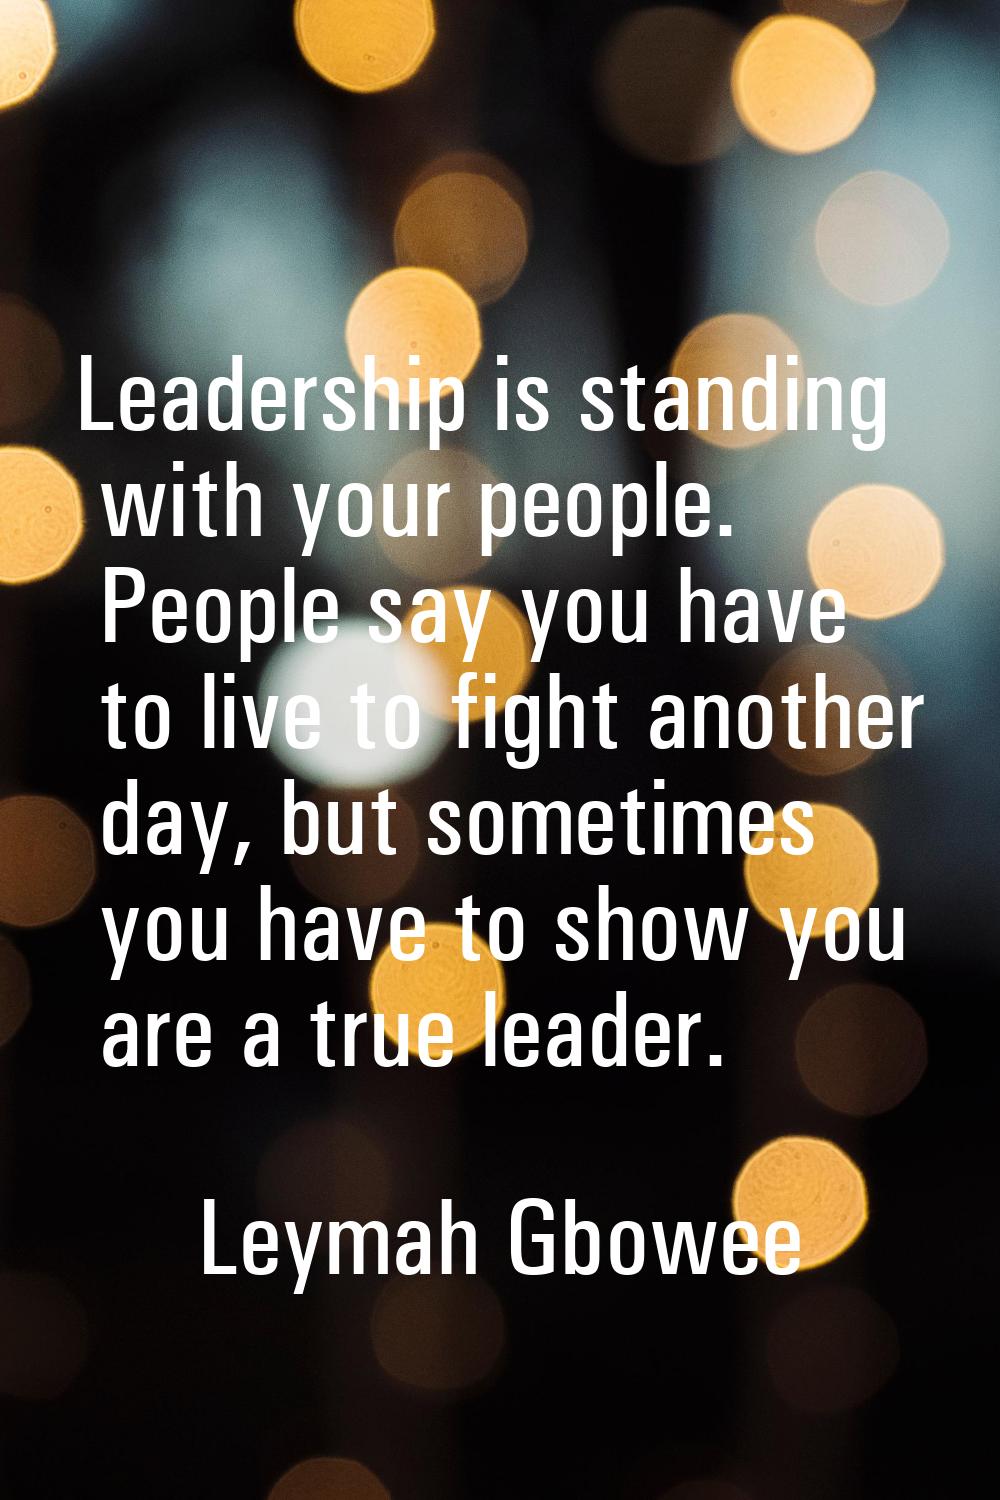 Leadership is standing with your people. People say you have to live to fight another day, but some